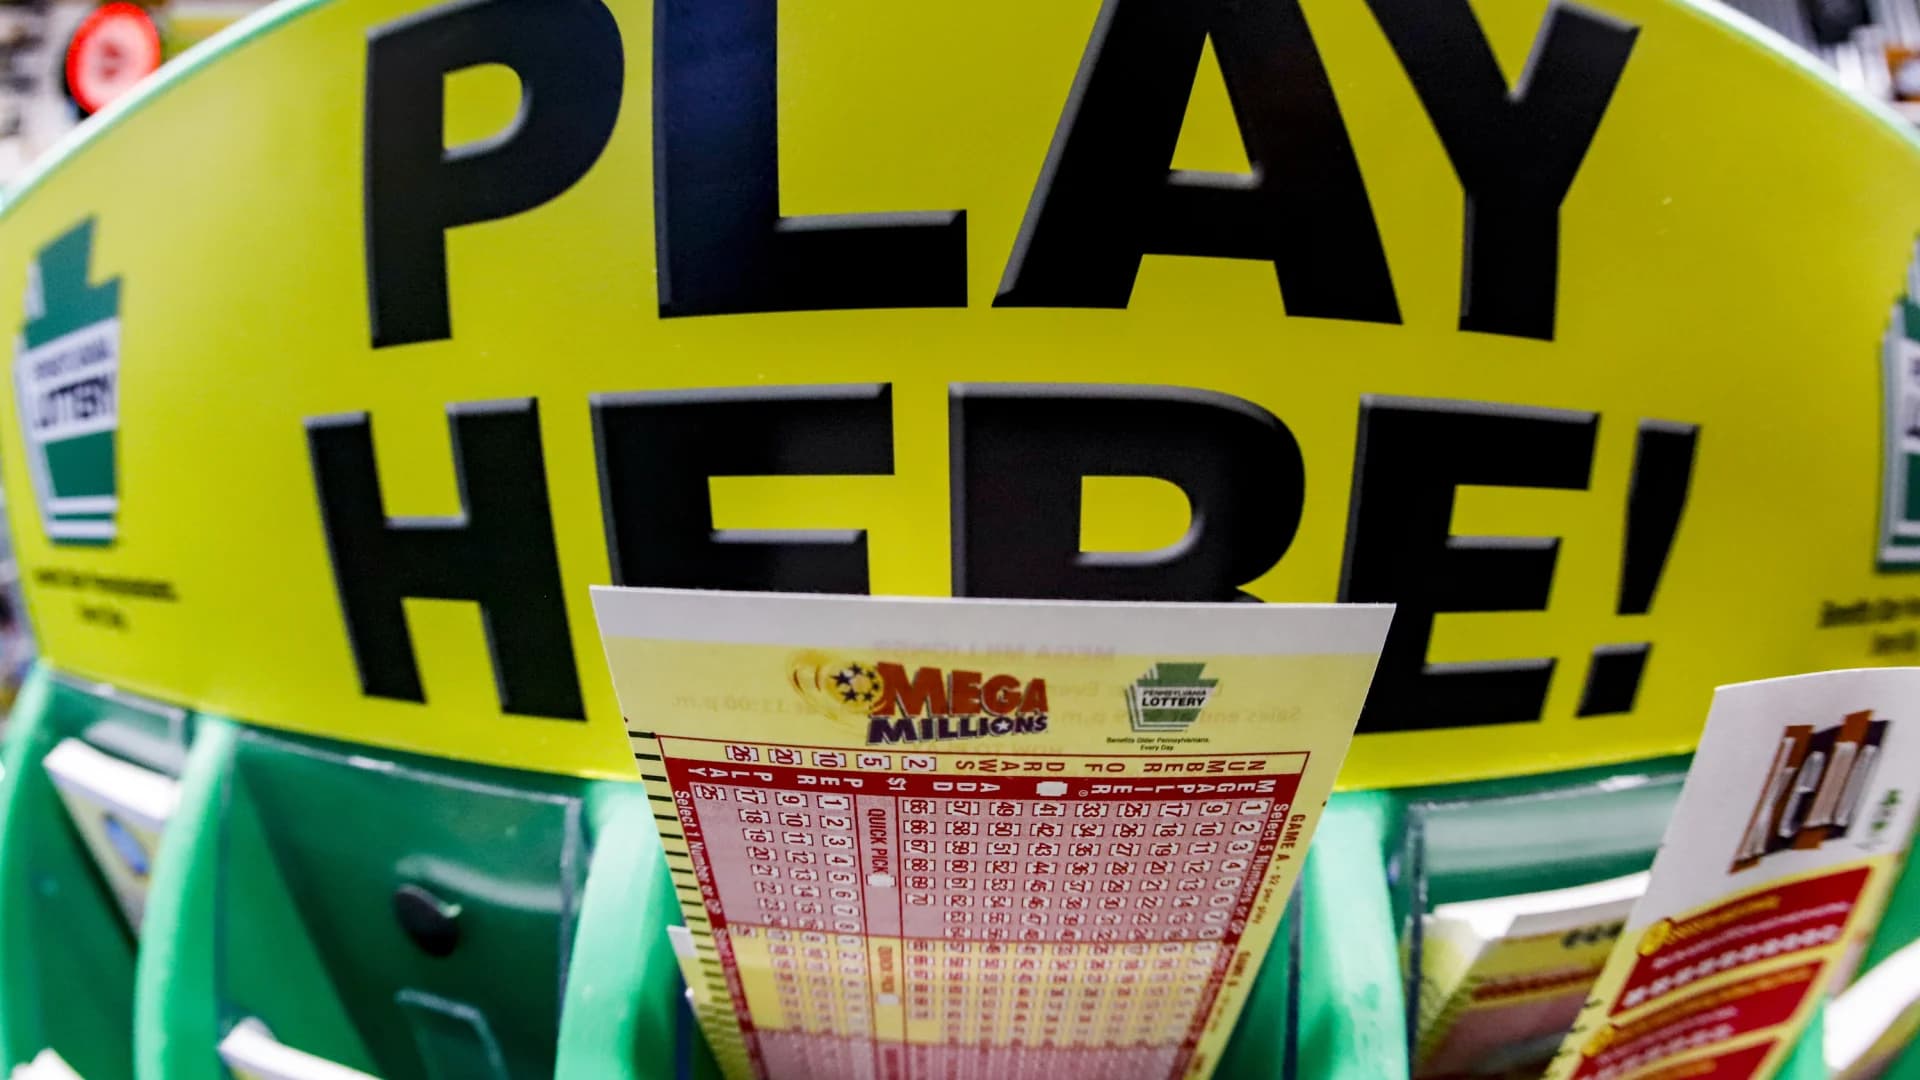 $297 million up for grabs in Tuesday's Mega Millions drawing